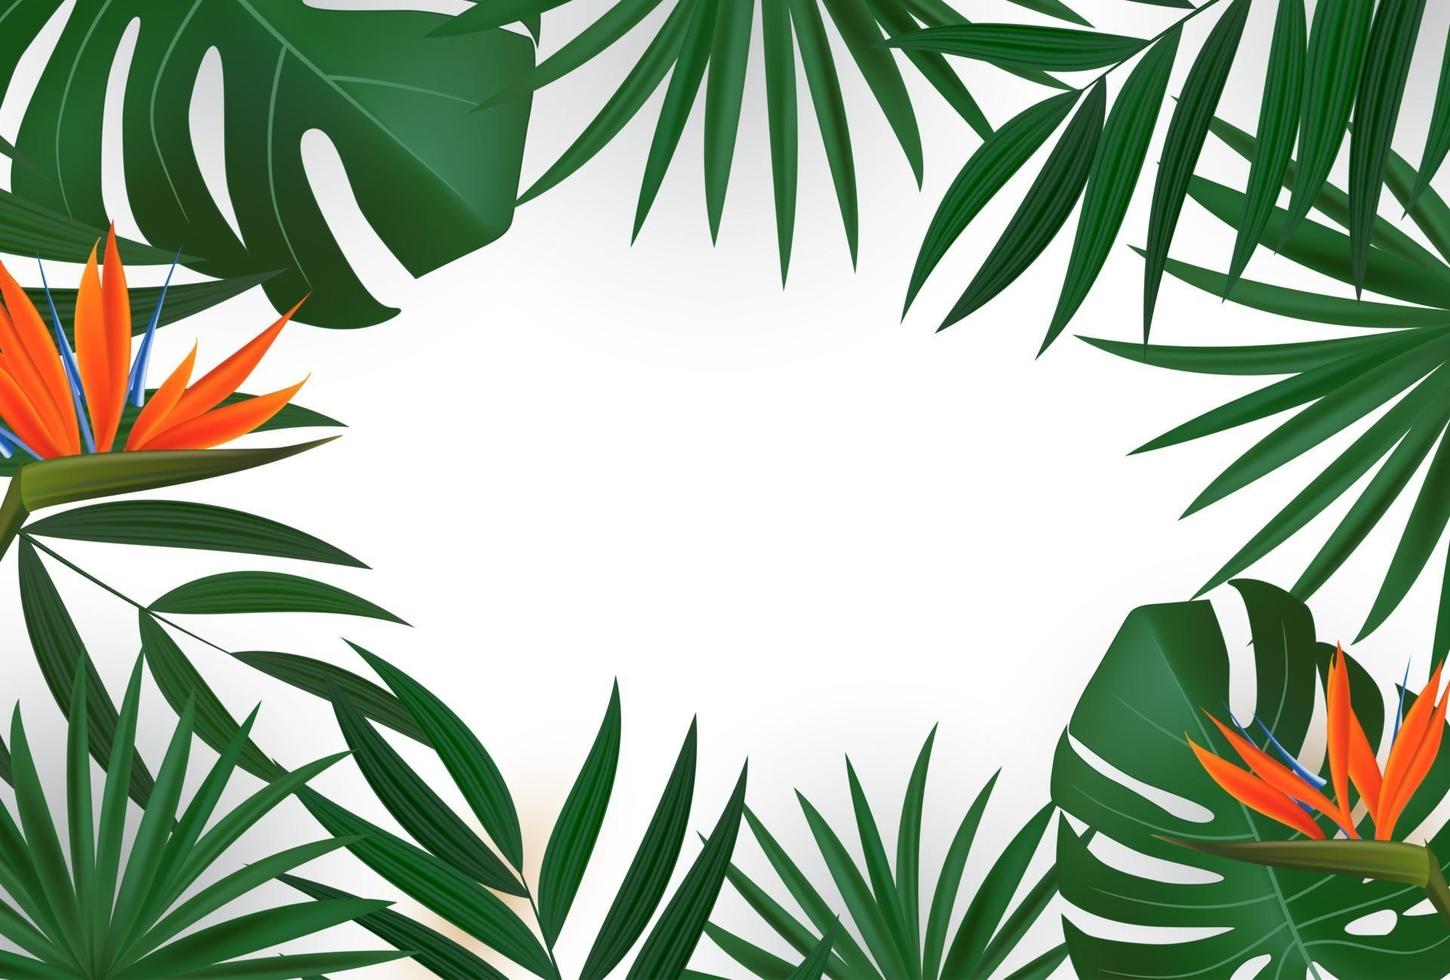 Natural Realistic Green Palm Leaf with Strelitzia Flower. Tropical Background vector